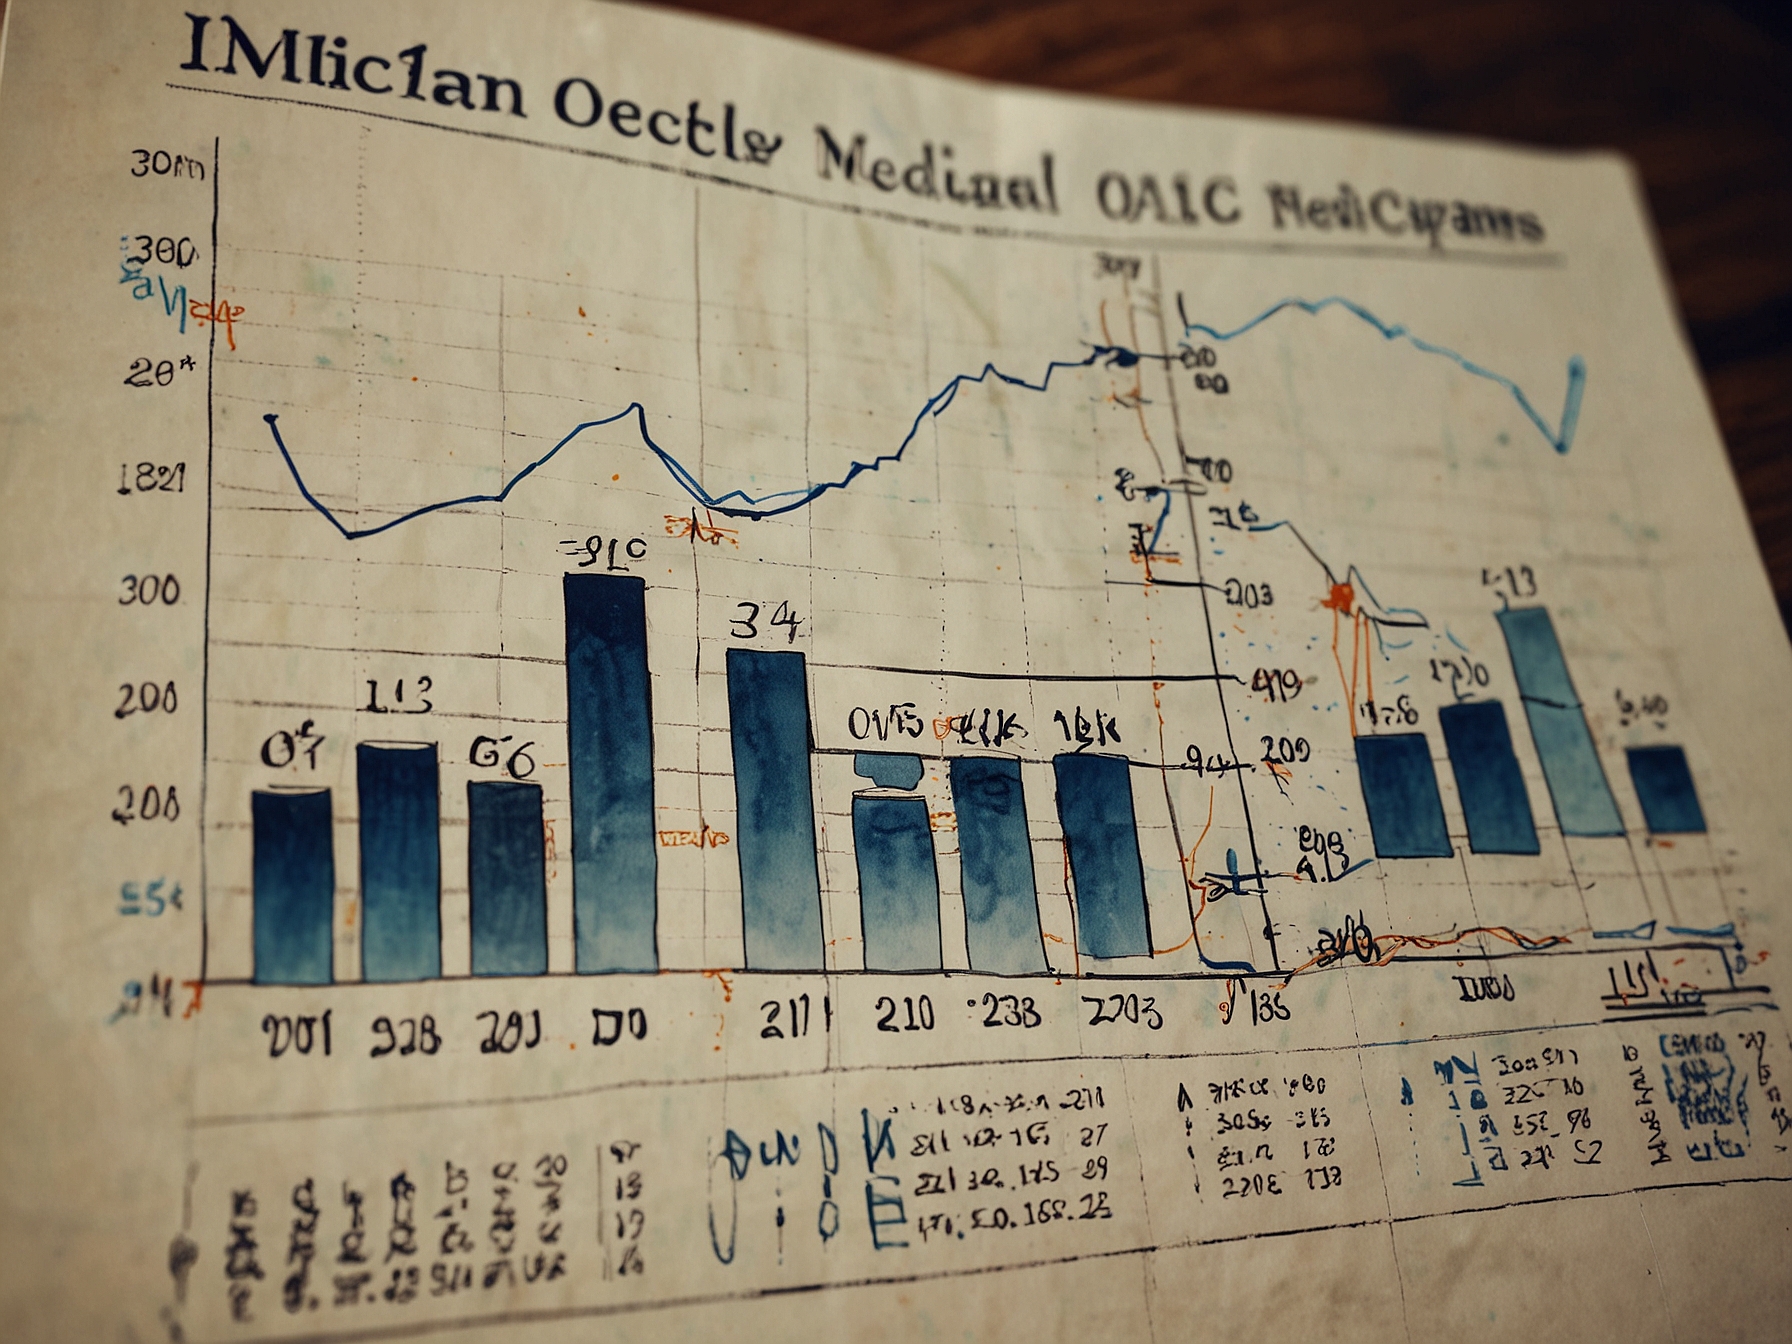 Chart showing the financial growth of Medicamen Organics over the years, with an emphasis on revenue streams, profitability, and potential market expansion post-IPO.